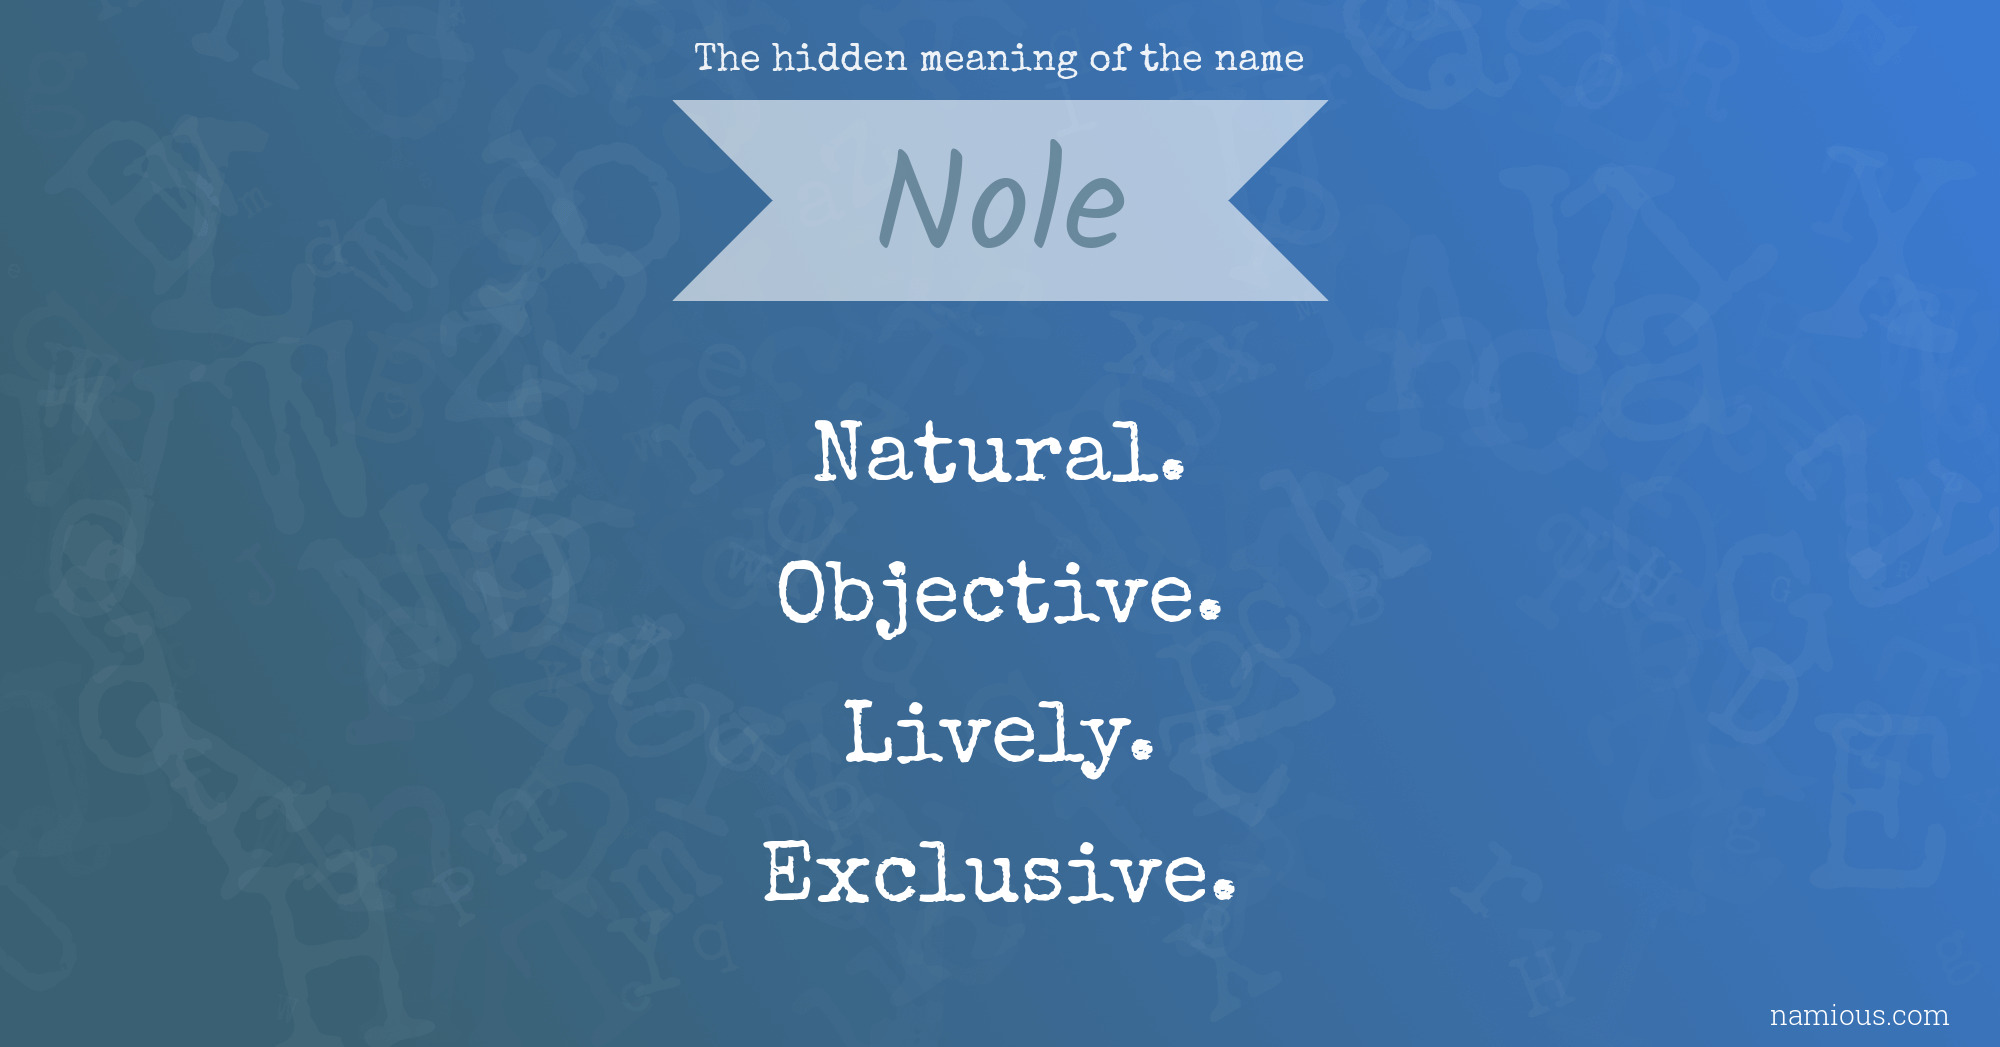 The hidden meaning of the name Nole